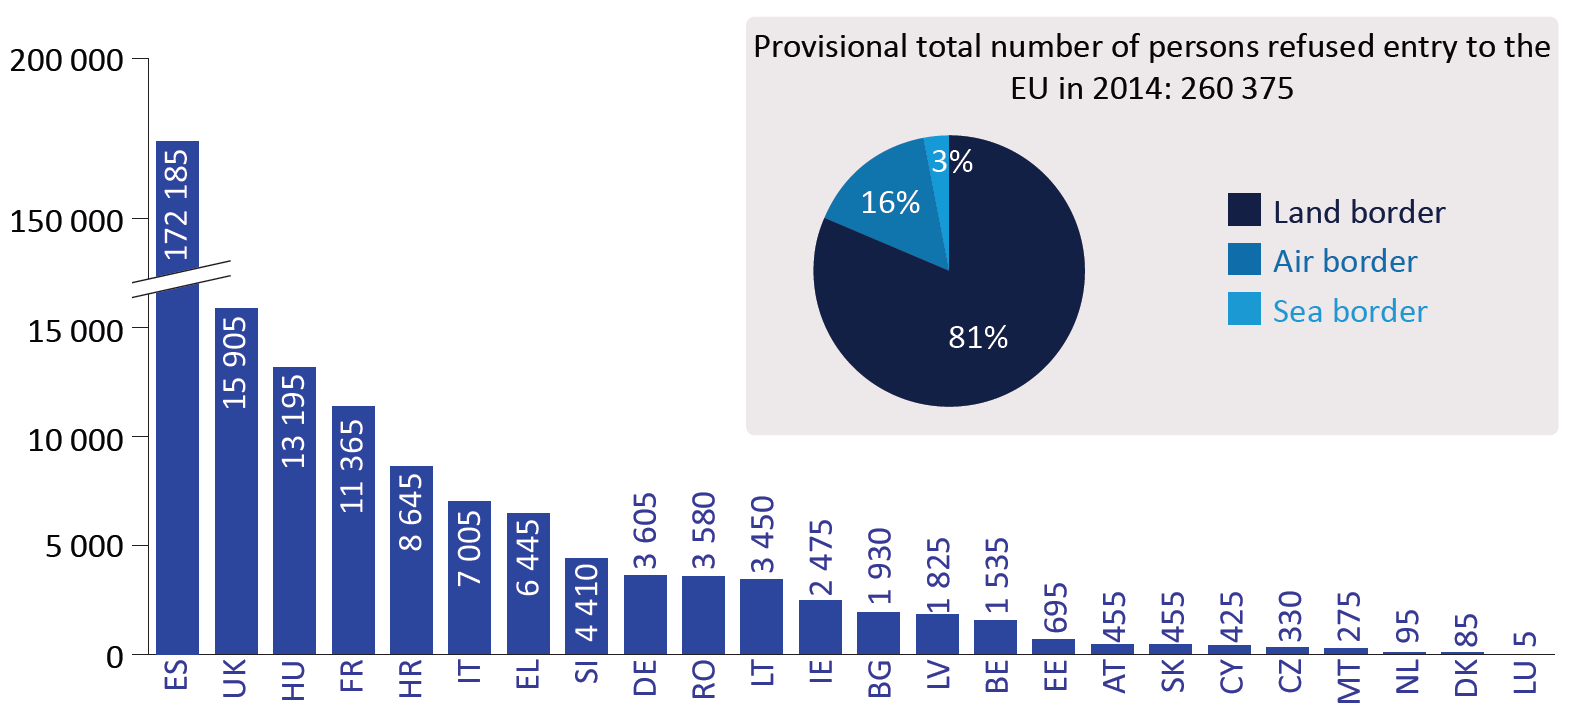 Number of persons refused entry at the EU’s external borders (2014)